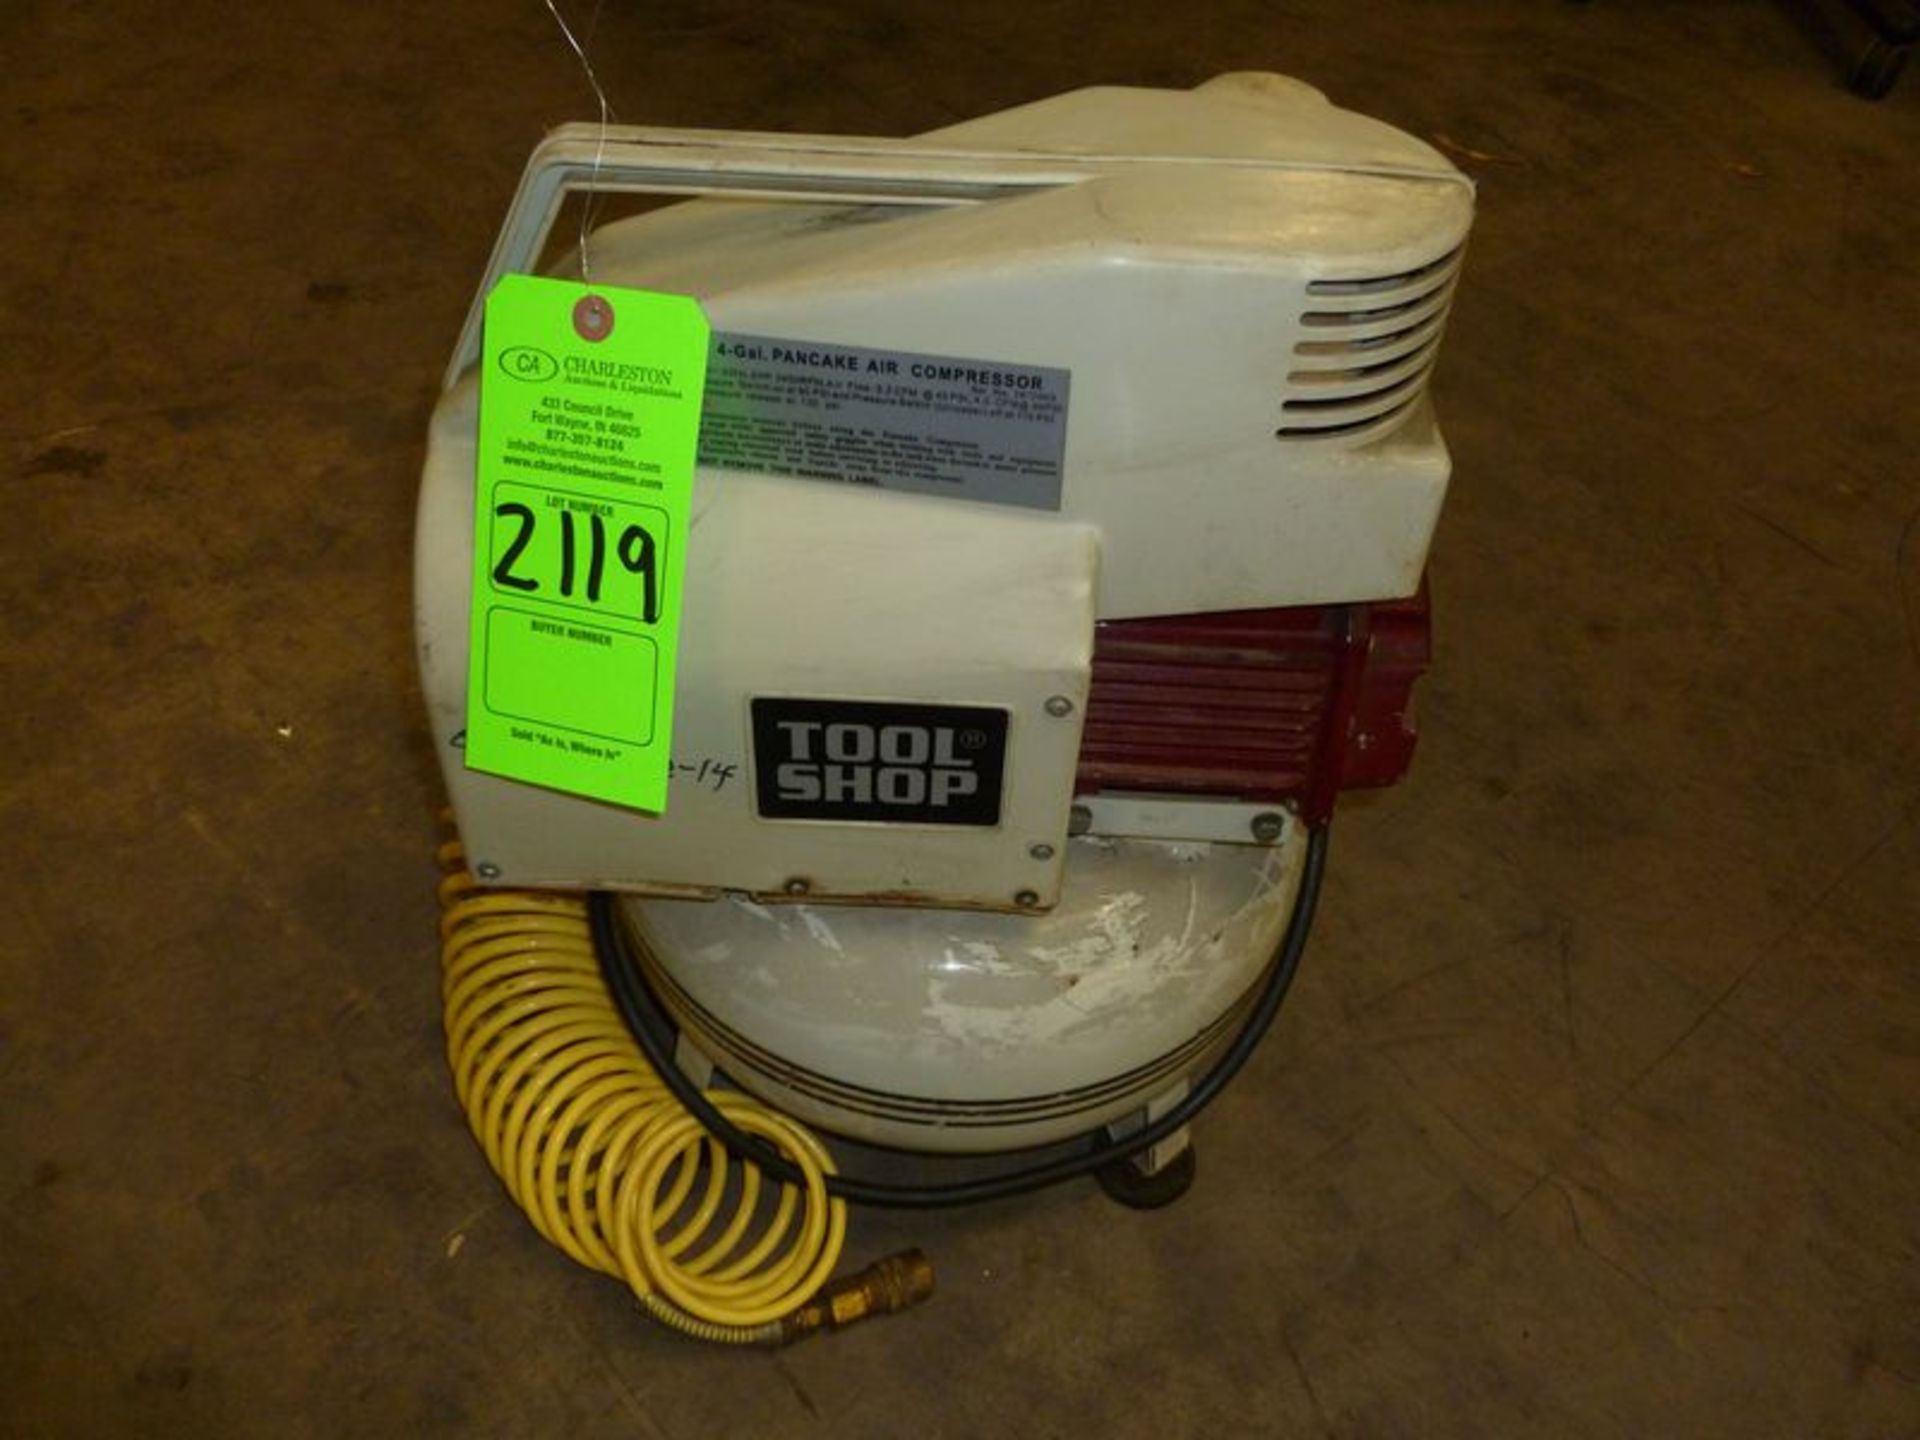 TOOL SHOP PANCAKE AIR COMPRESSOR 2 HP 4 GALLON (LOCATED AT 6901 ARDMORE AVE. FORT WAYNE, IN 46809)